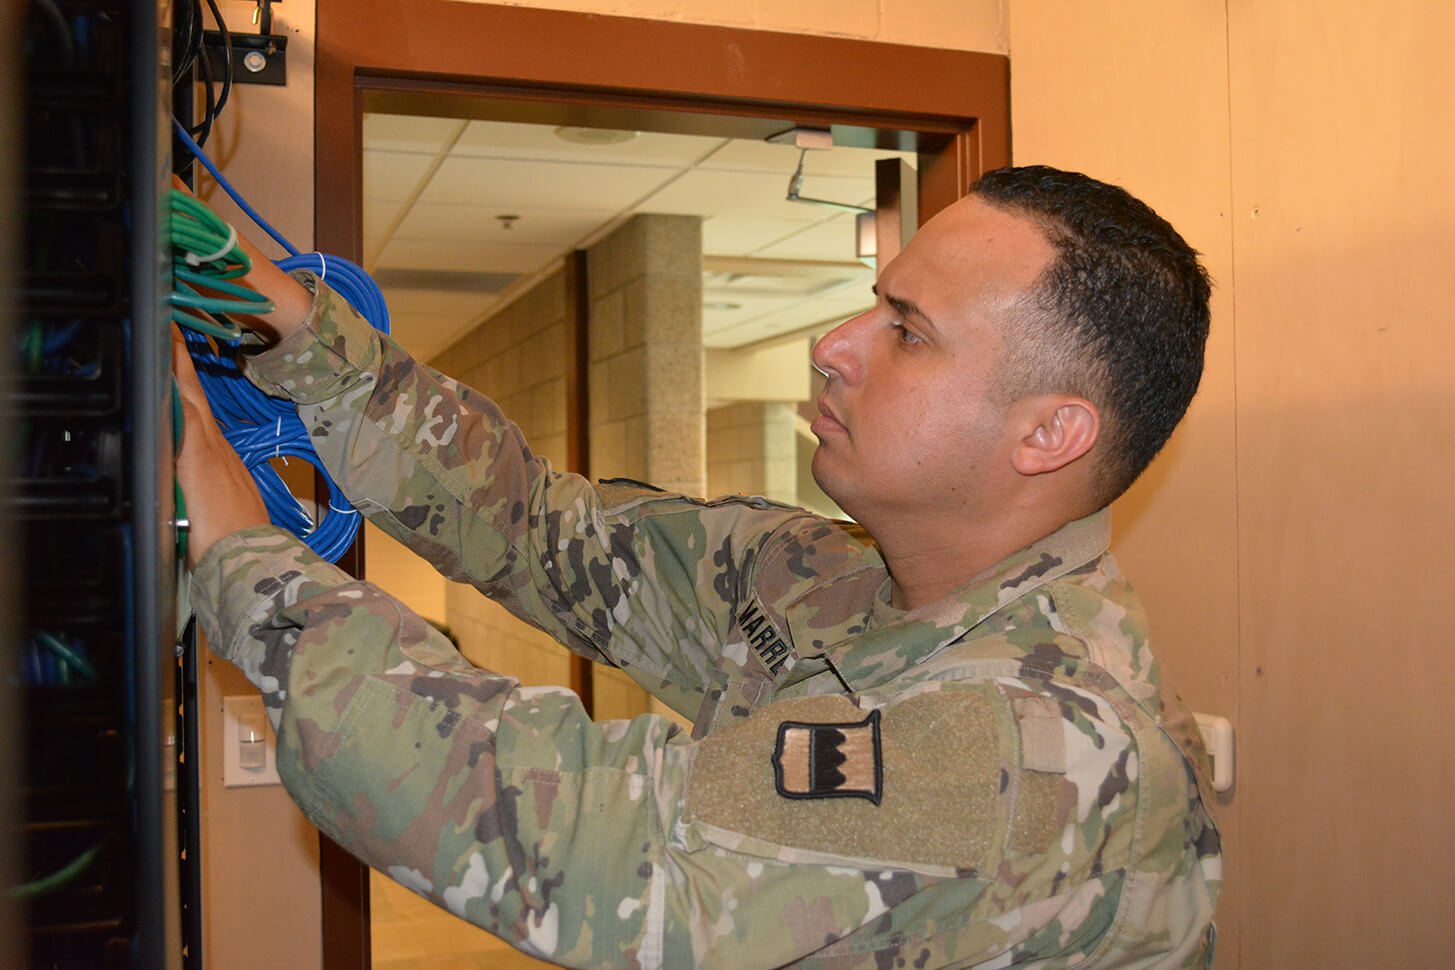 Staff Sgt. Hector Marrero, an Information Technology Specialist assigned to the 80th Training Command, trouble shoots computer connectivity in The Army School System Training Center’s Network Operation Command, Grand Prairie, Texas, March 7, 2016.